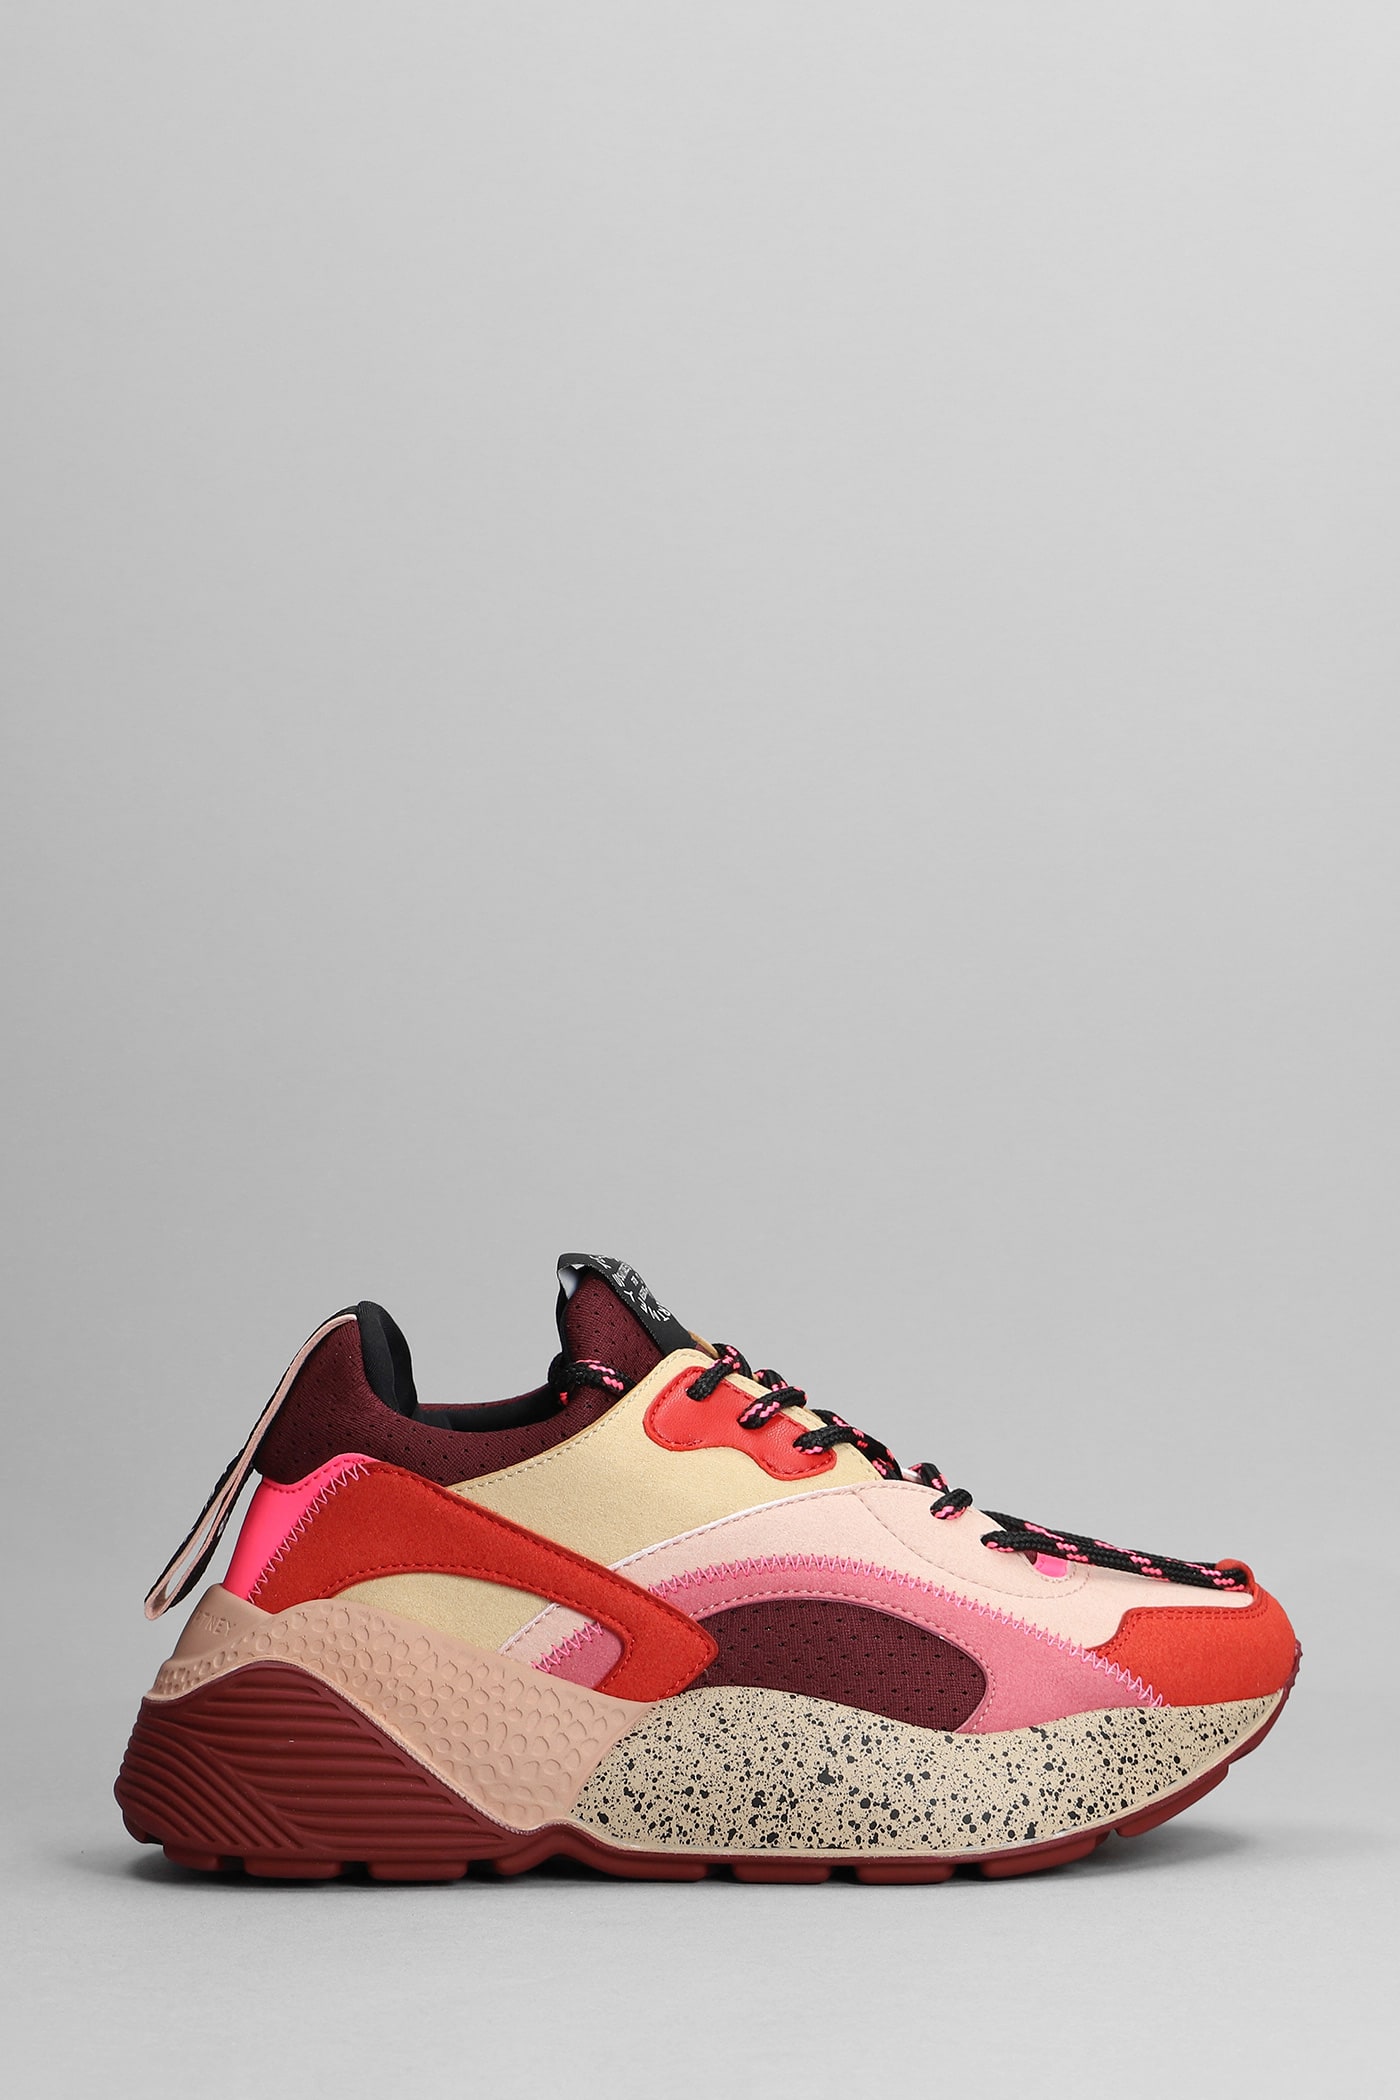 Stella McCartney Eclypse Sneakers In Bordeaux Suede And Leather